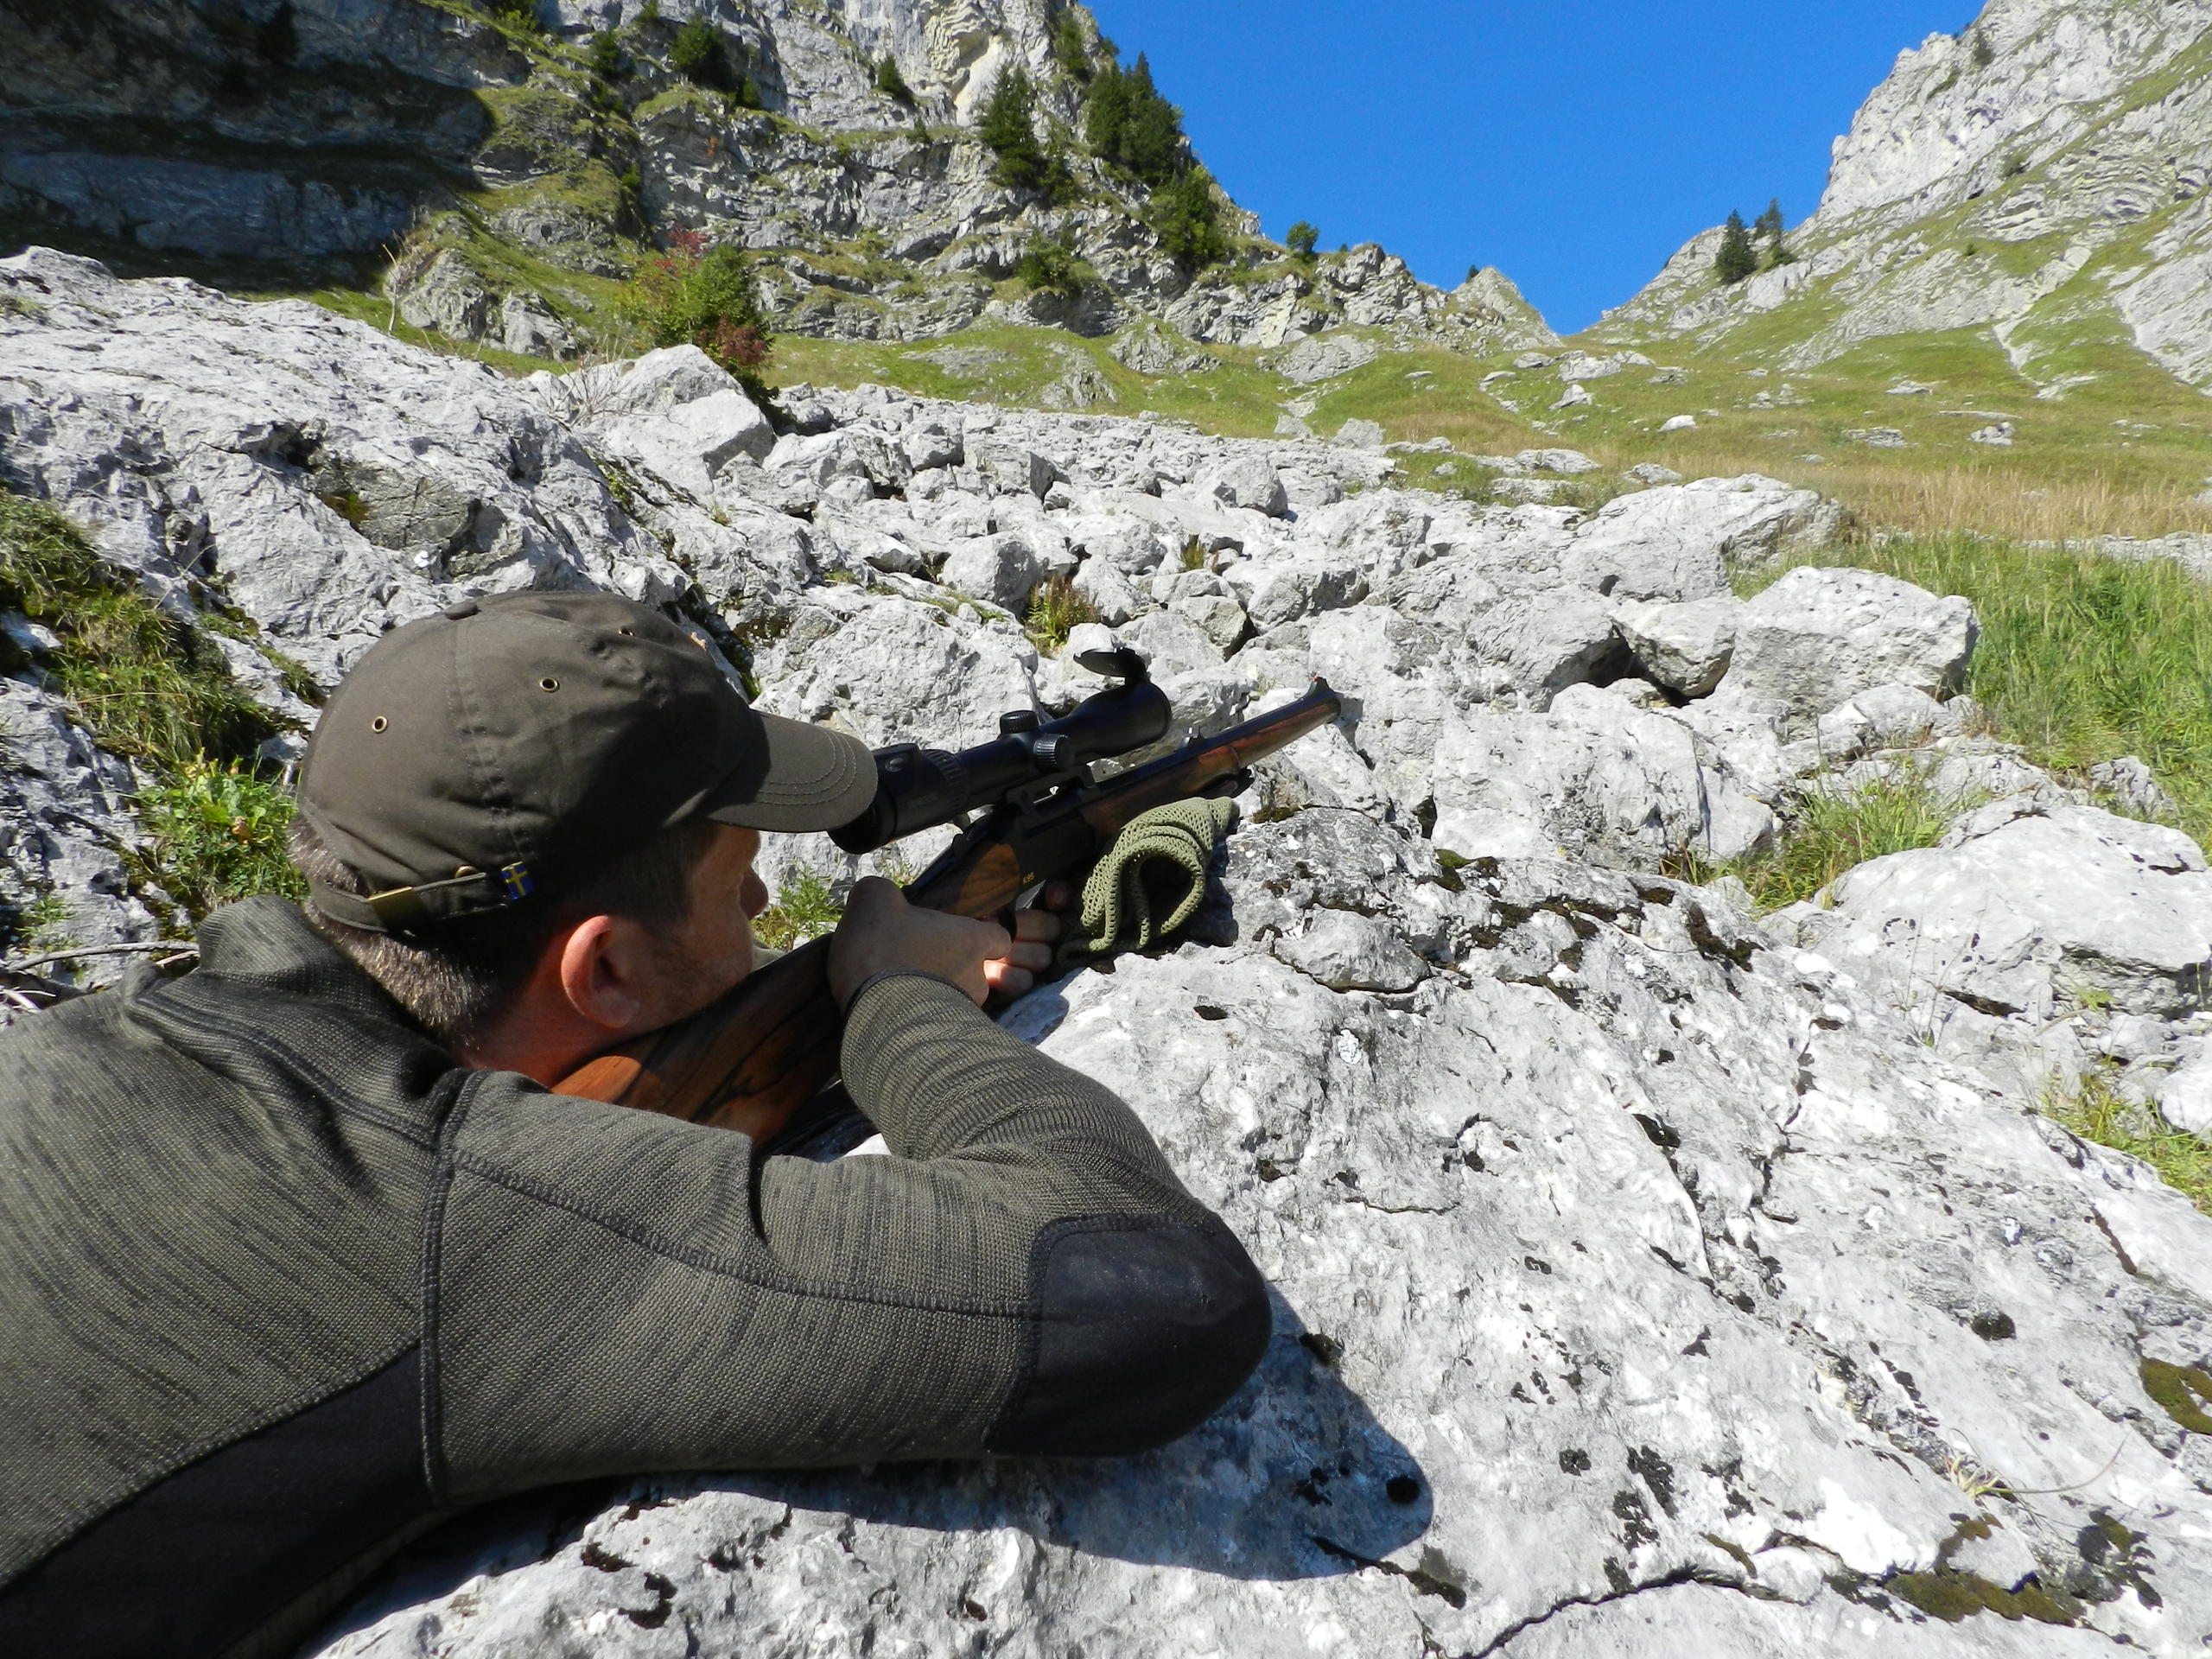 Hunter takes aim with his rifle in the mountains